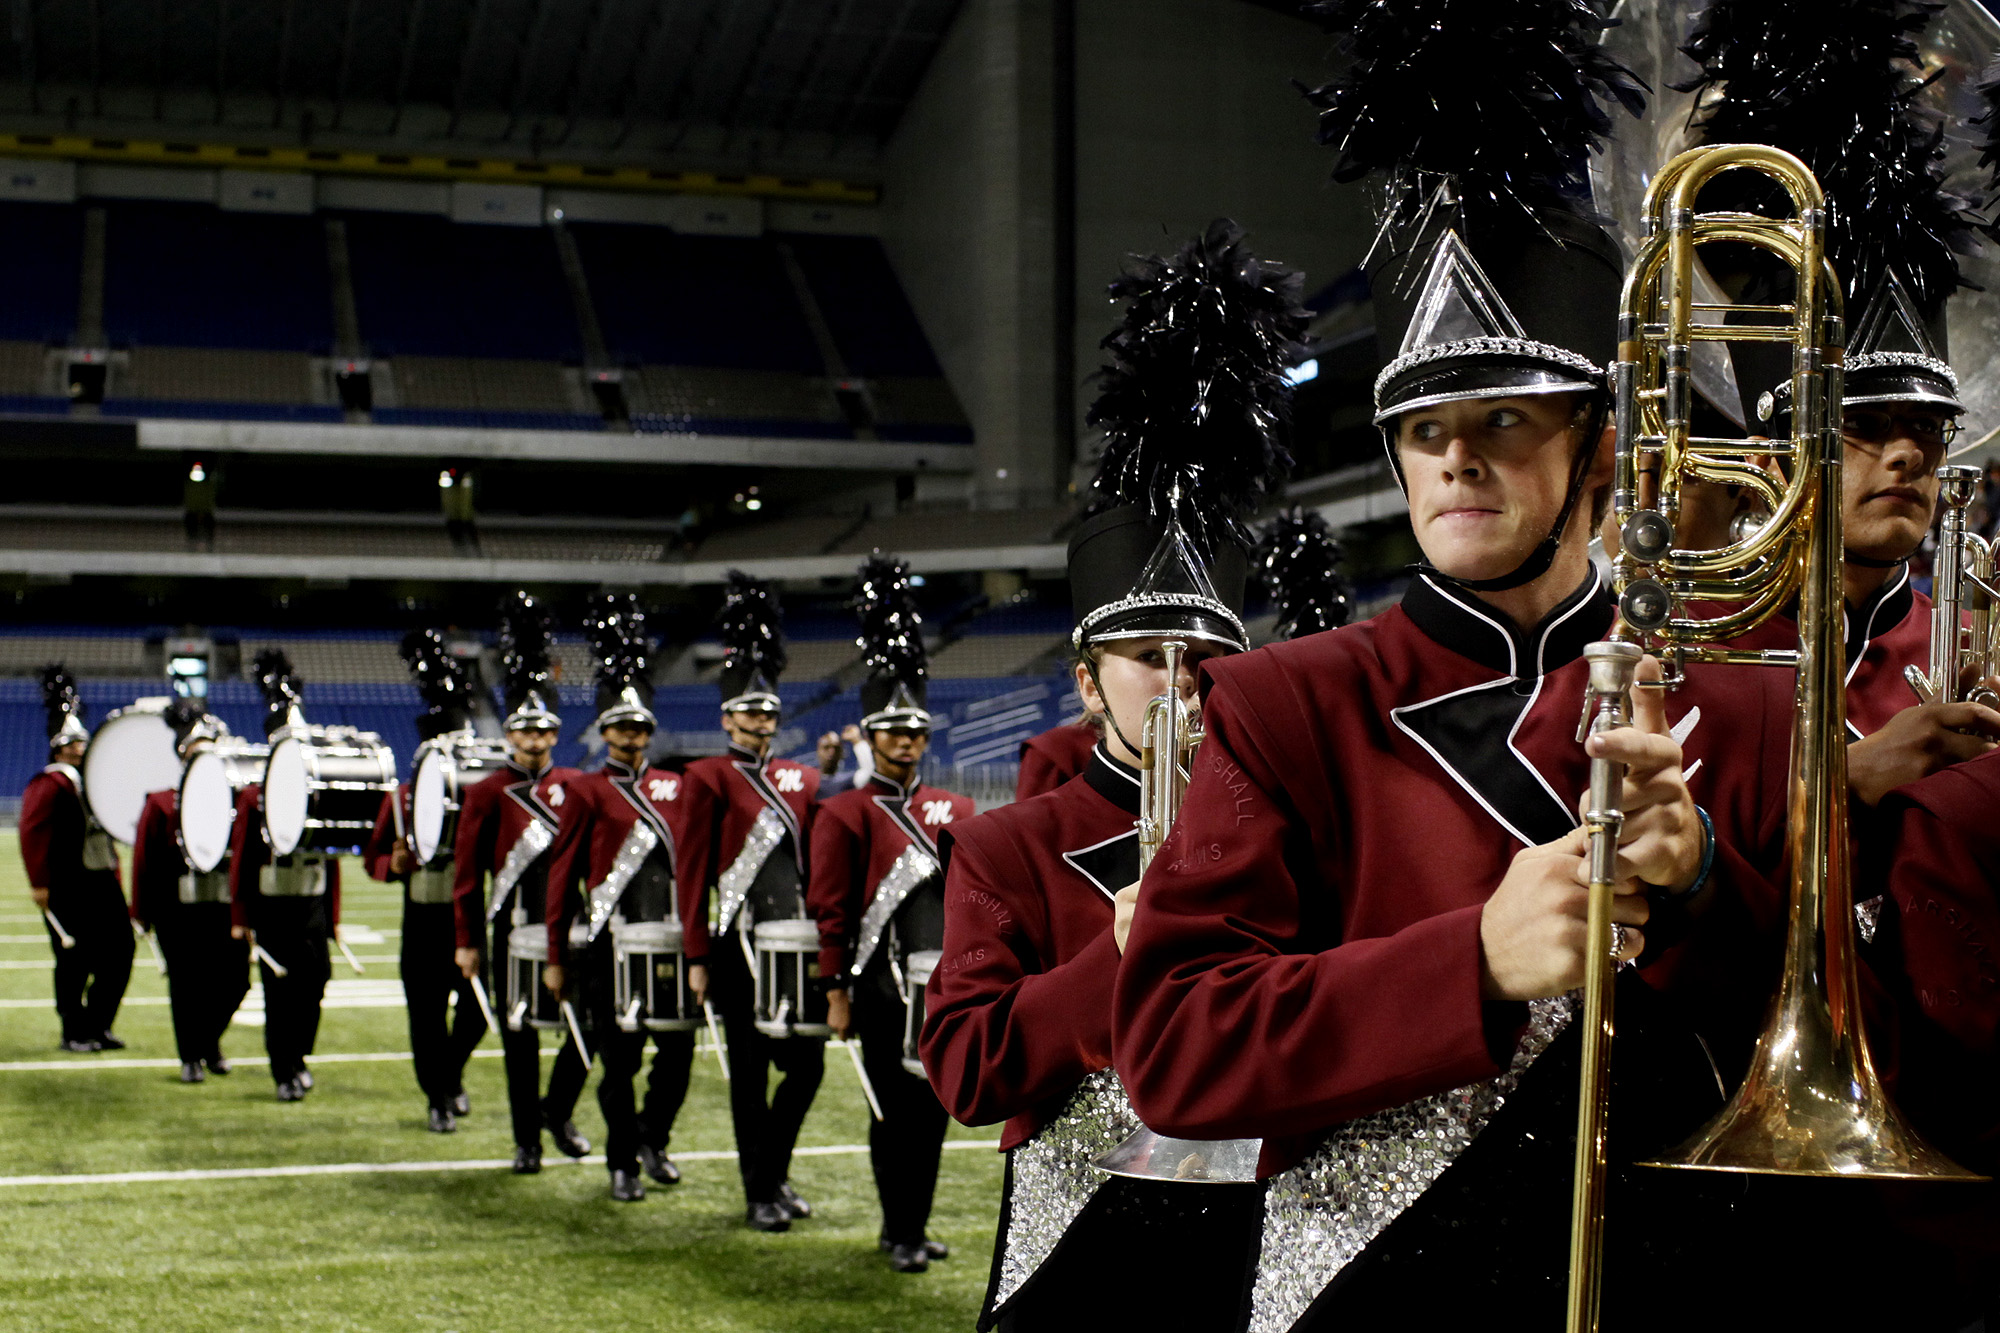 Bands of America competition taking place at the Alamodome